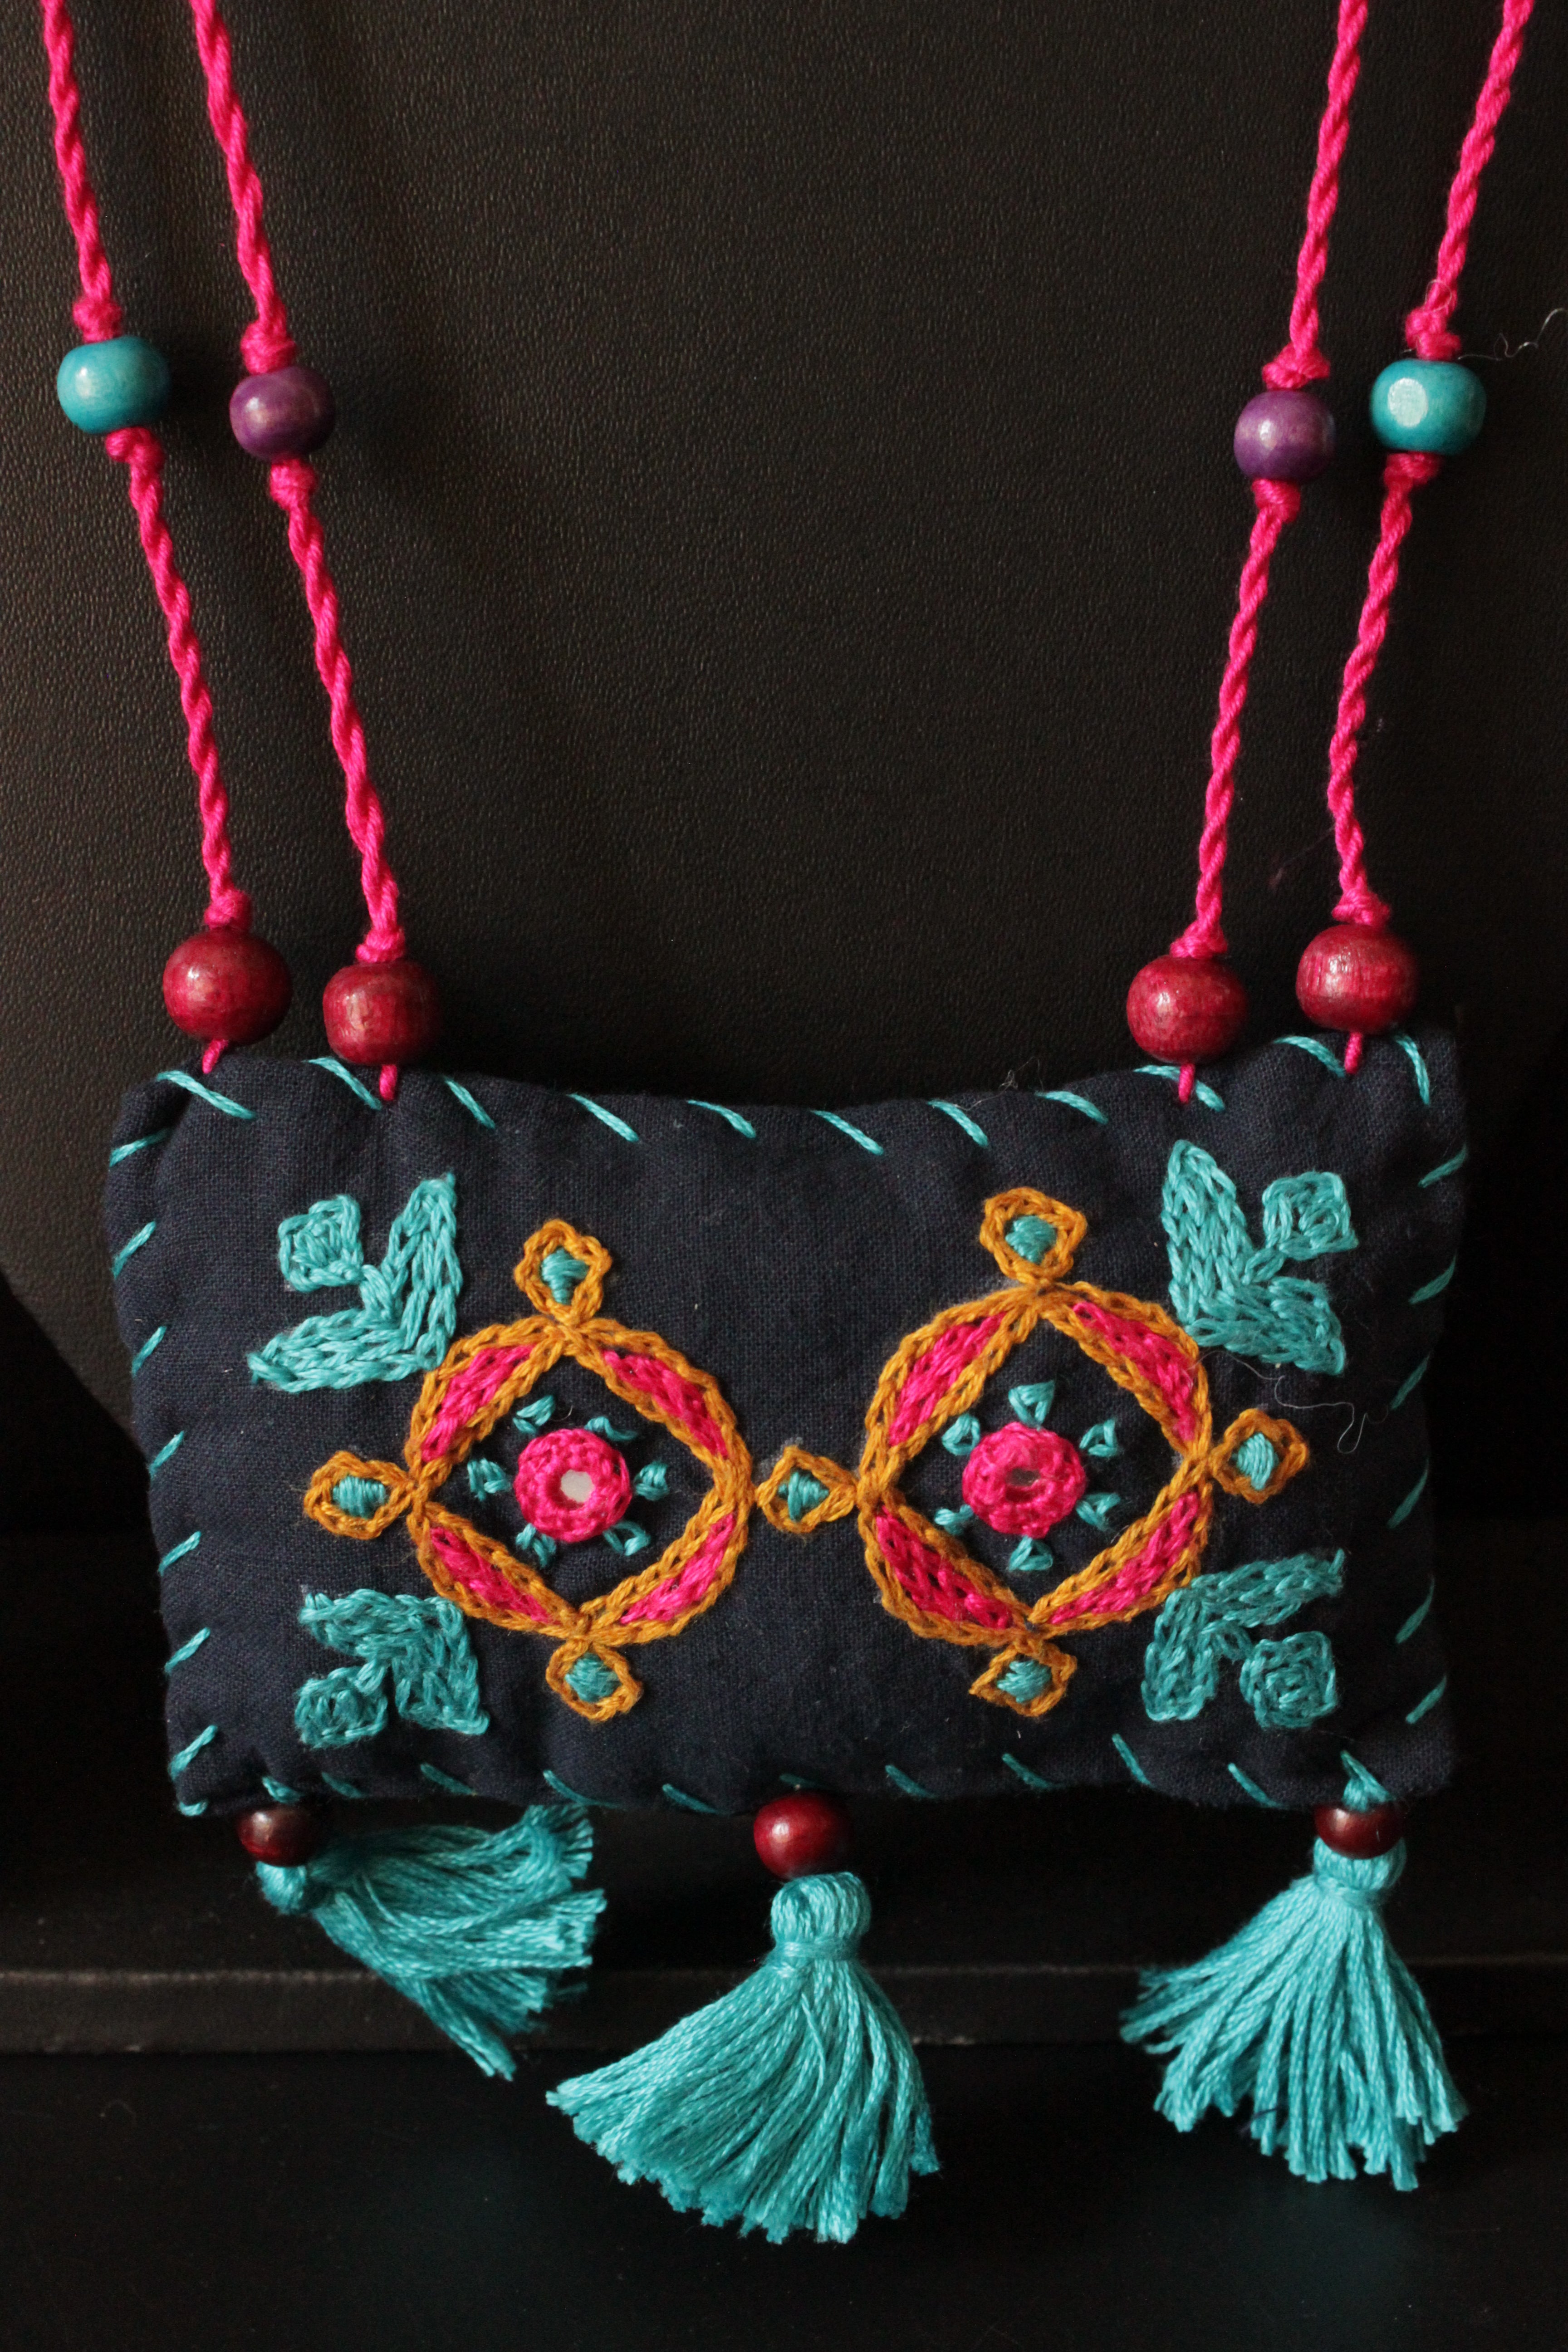 Black and Multi-Color Cross-Stitch Handcrafted Rope Closure Handcrafted Fabric Necklace